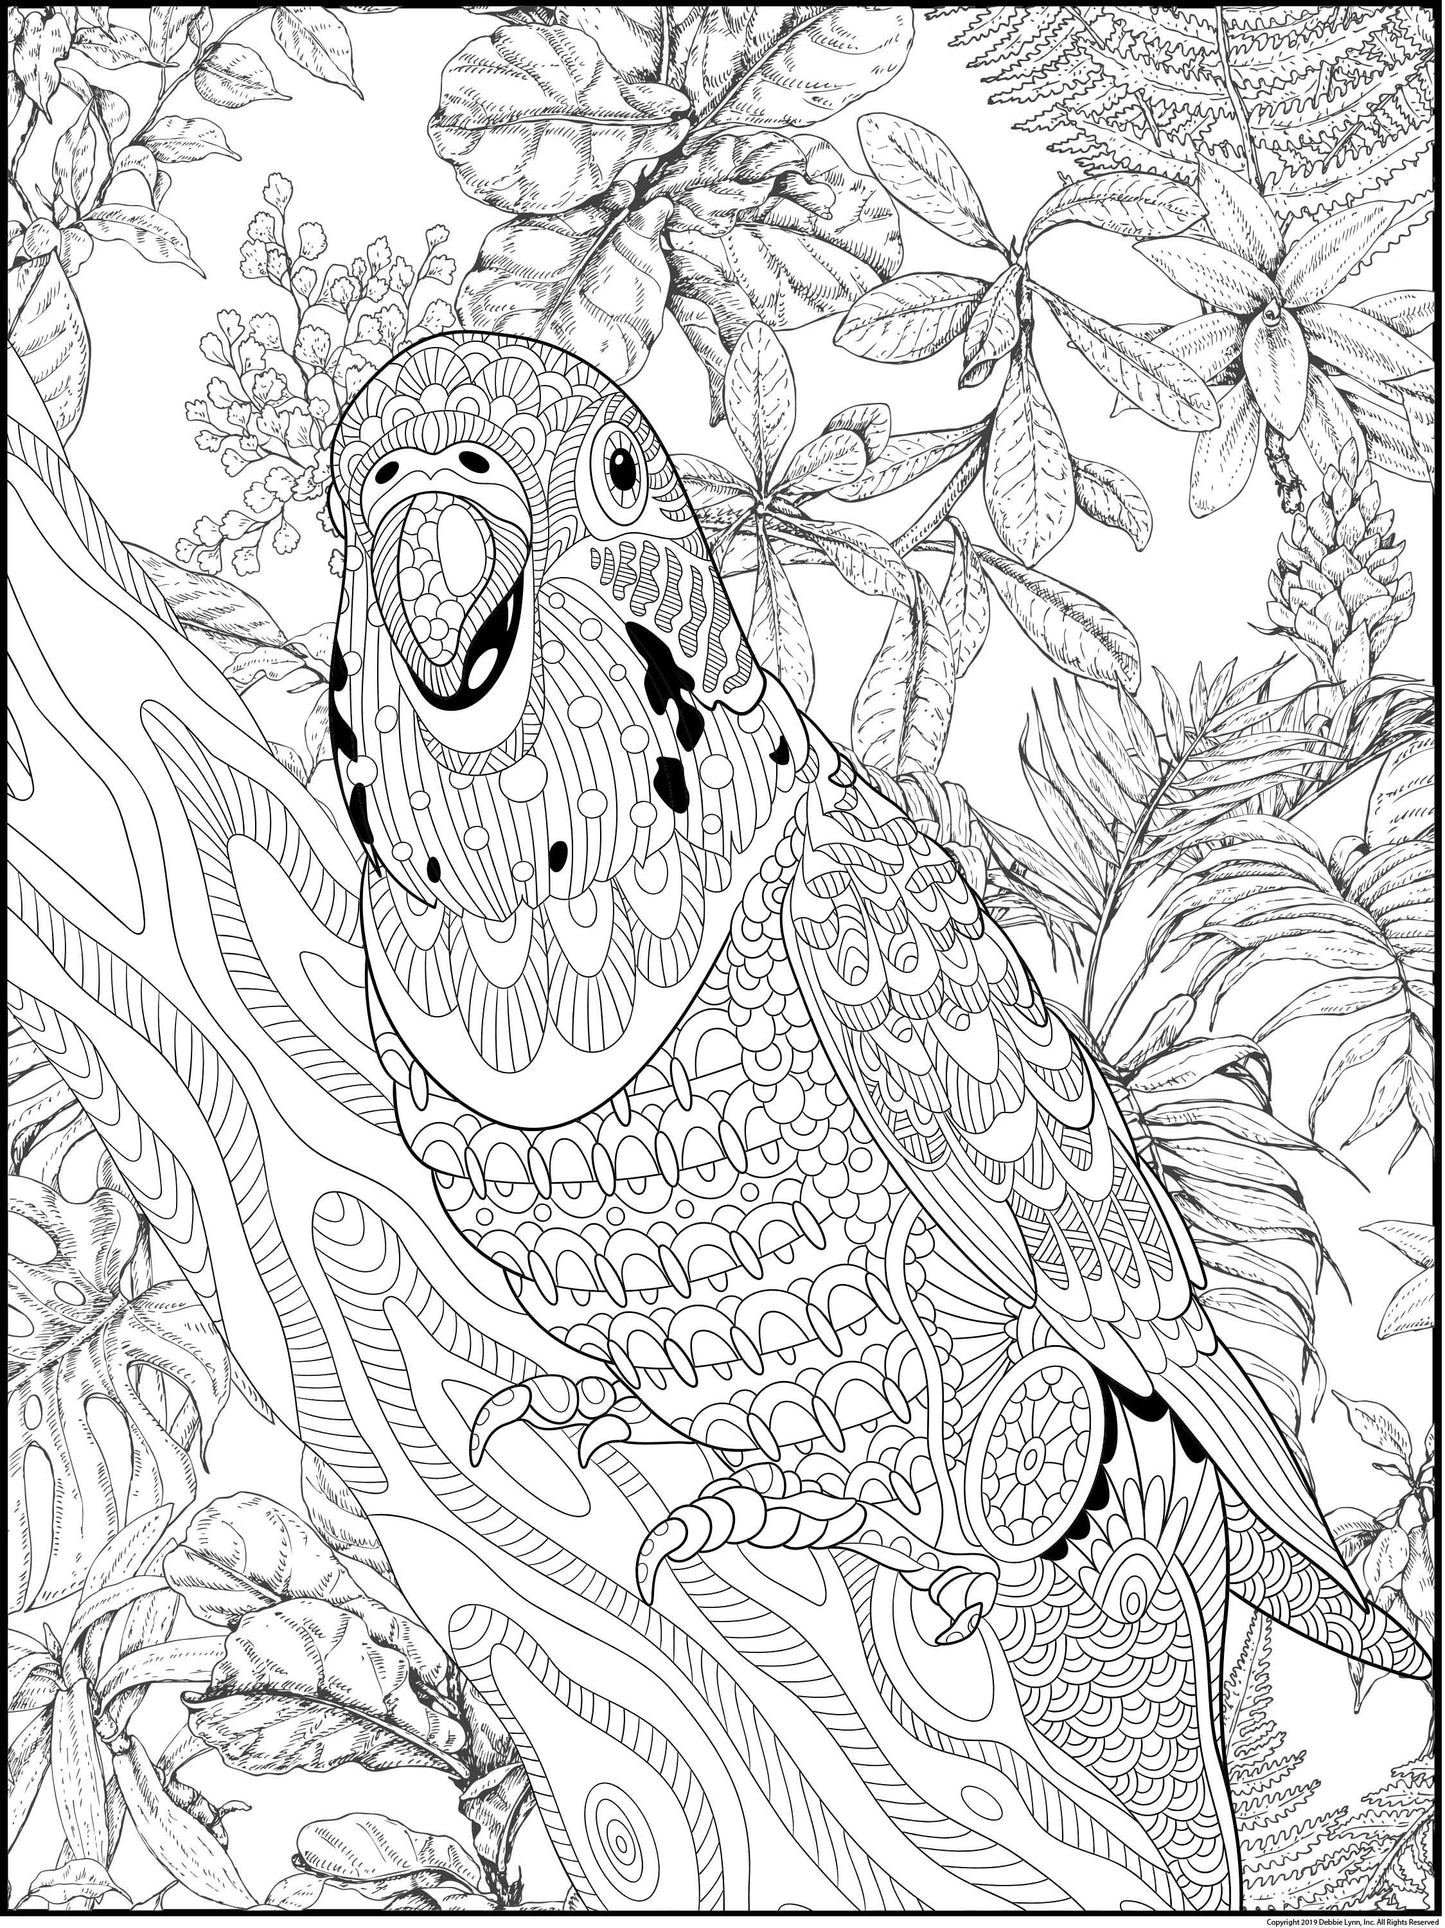 Parrot Personalized Giant Coloring Poster 46"x60"